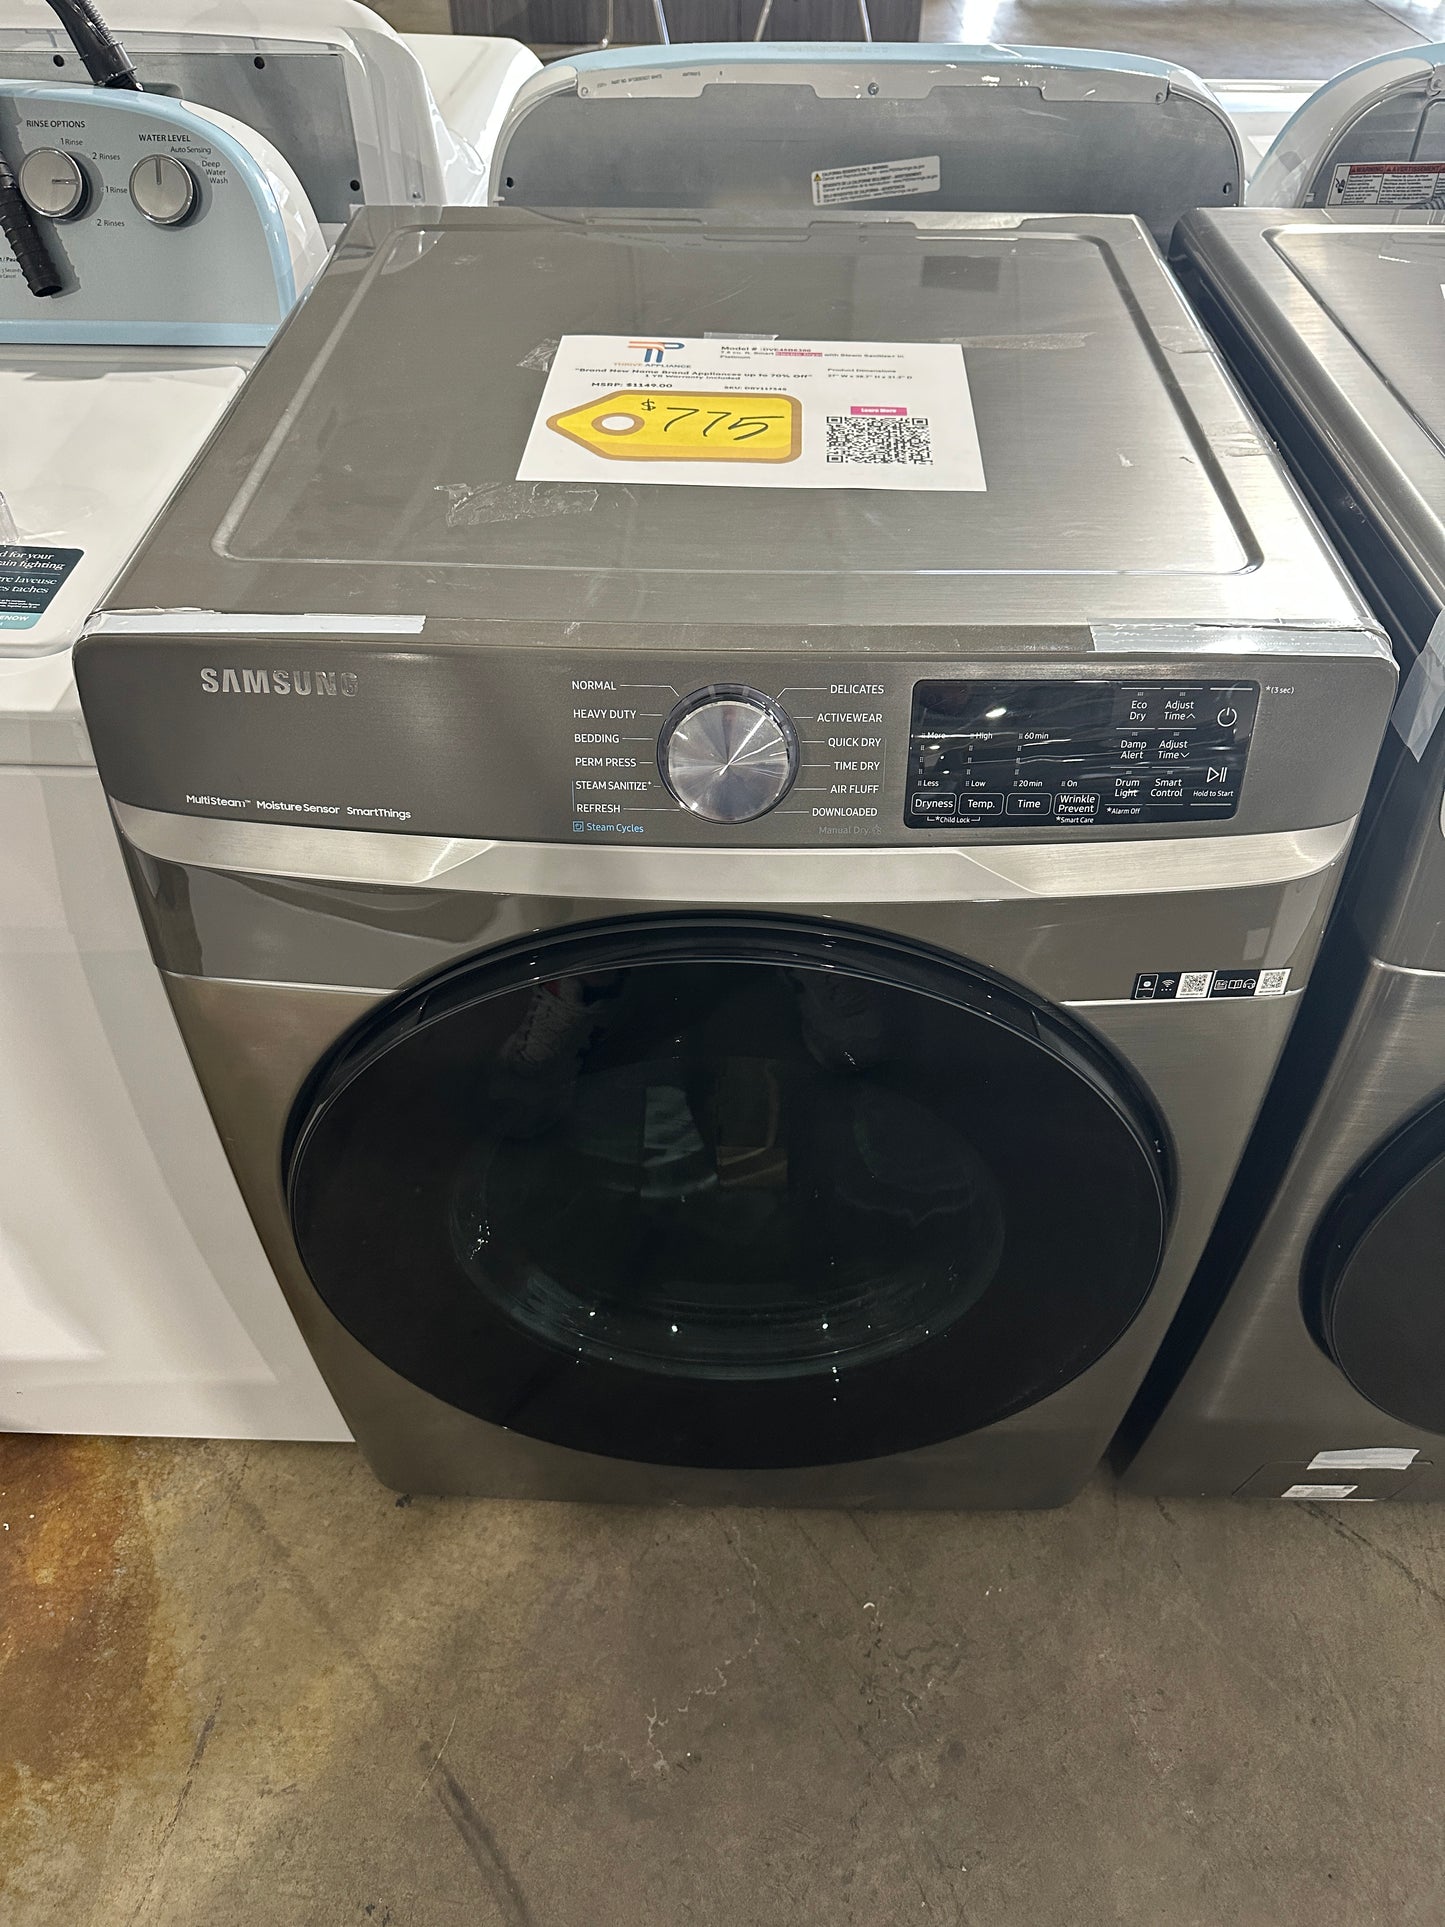 NEW SAMSUNG DRYER with STEAM SANITIZE - DRY11734S DVE45B6300P